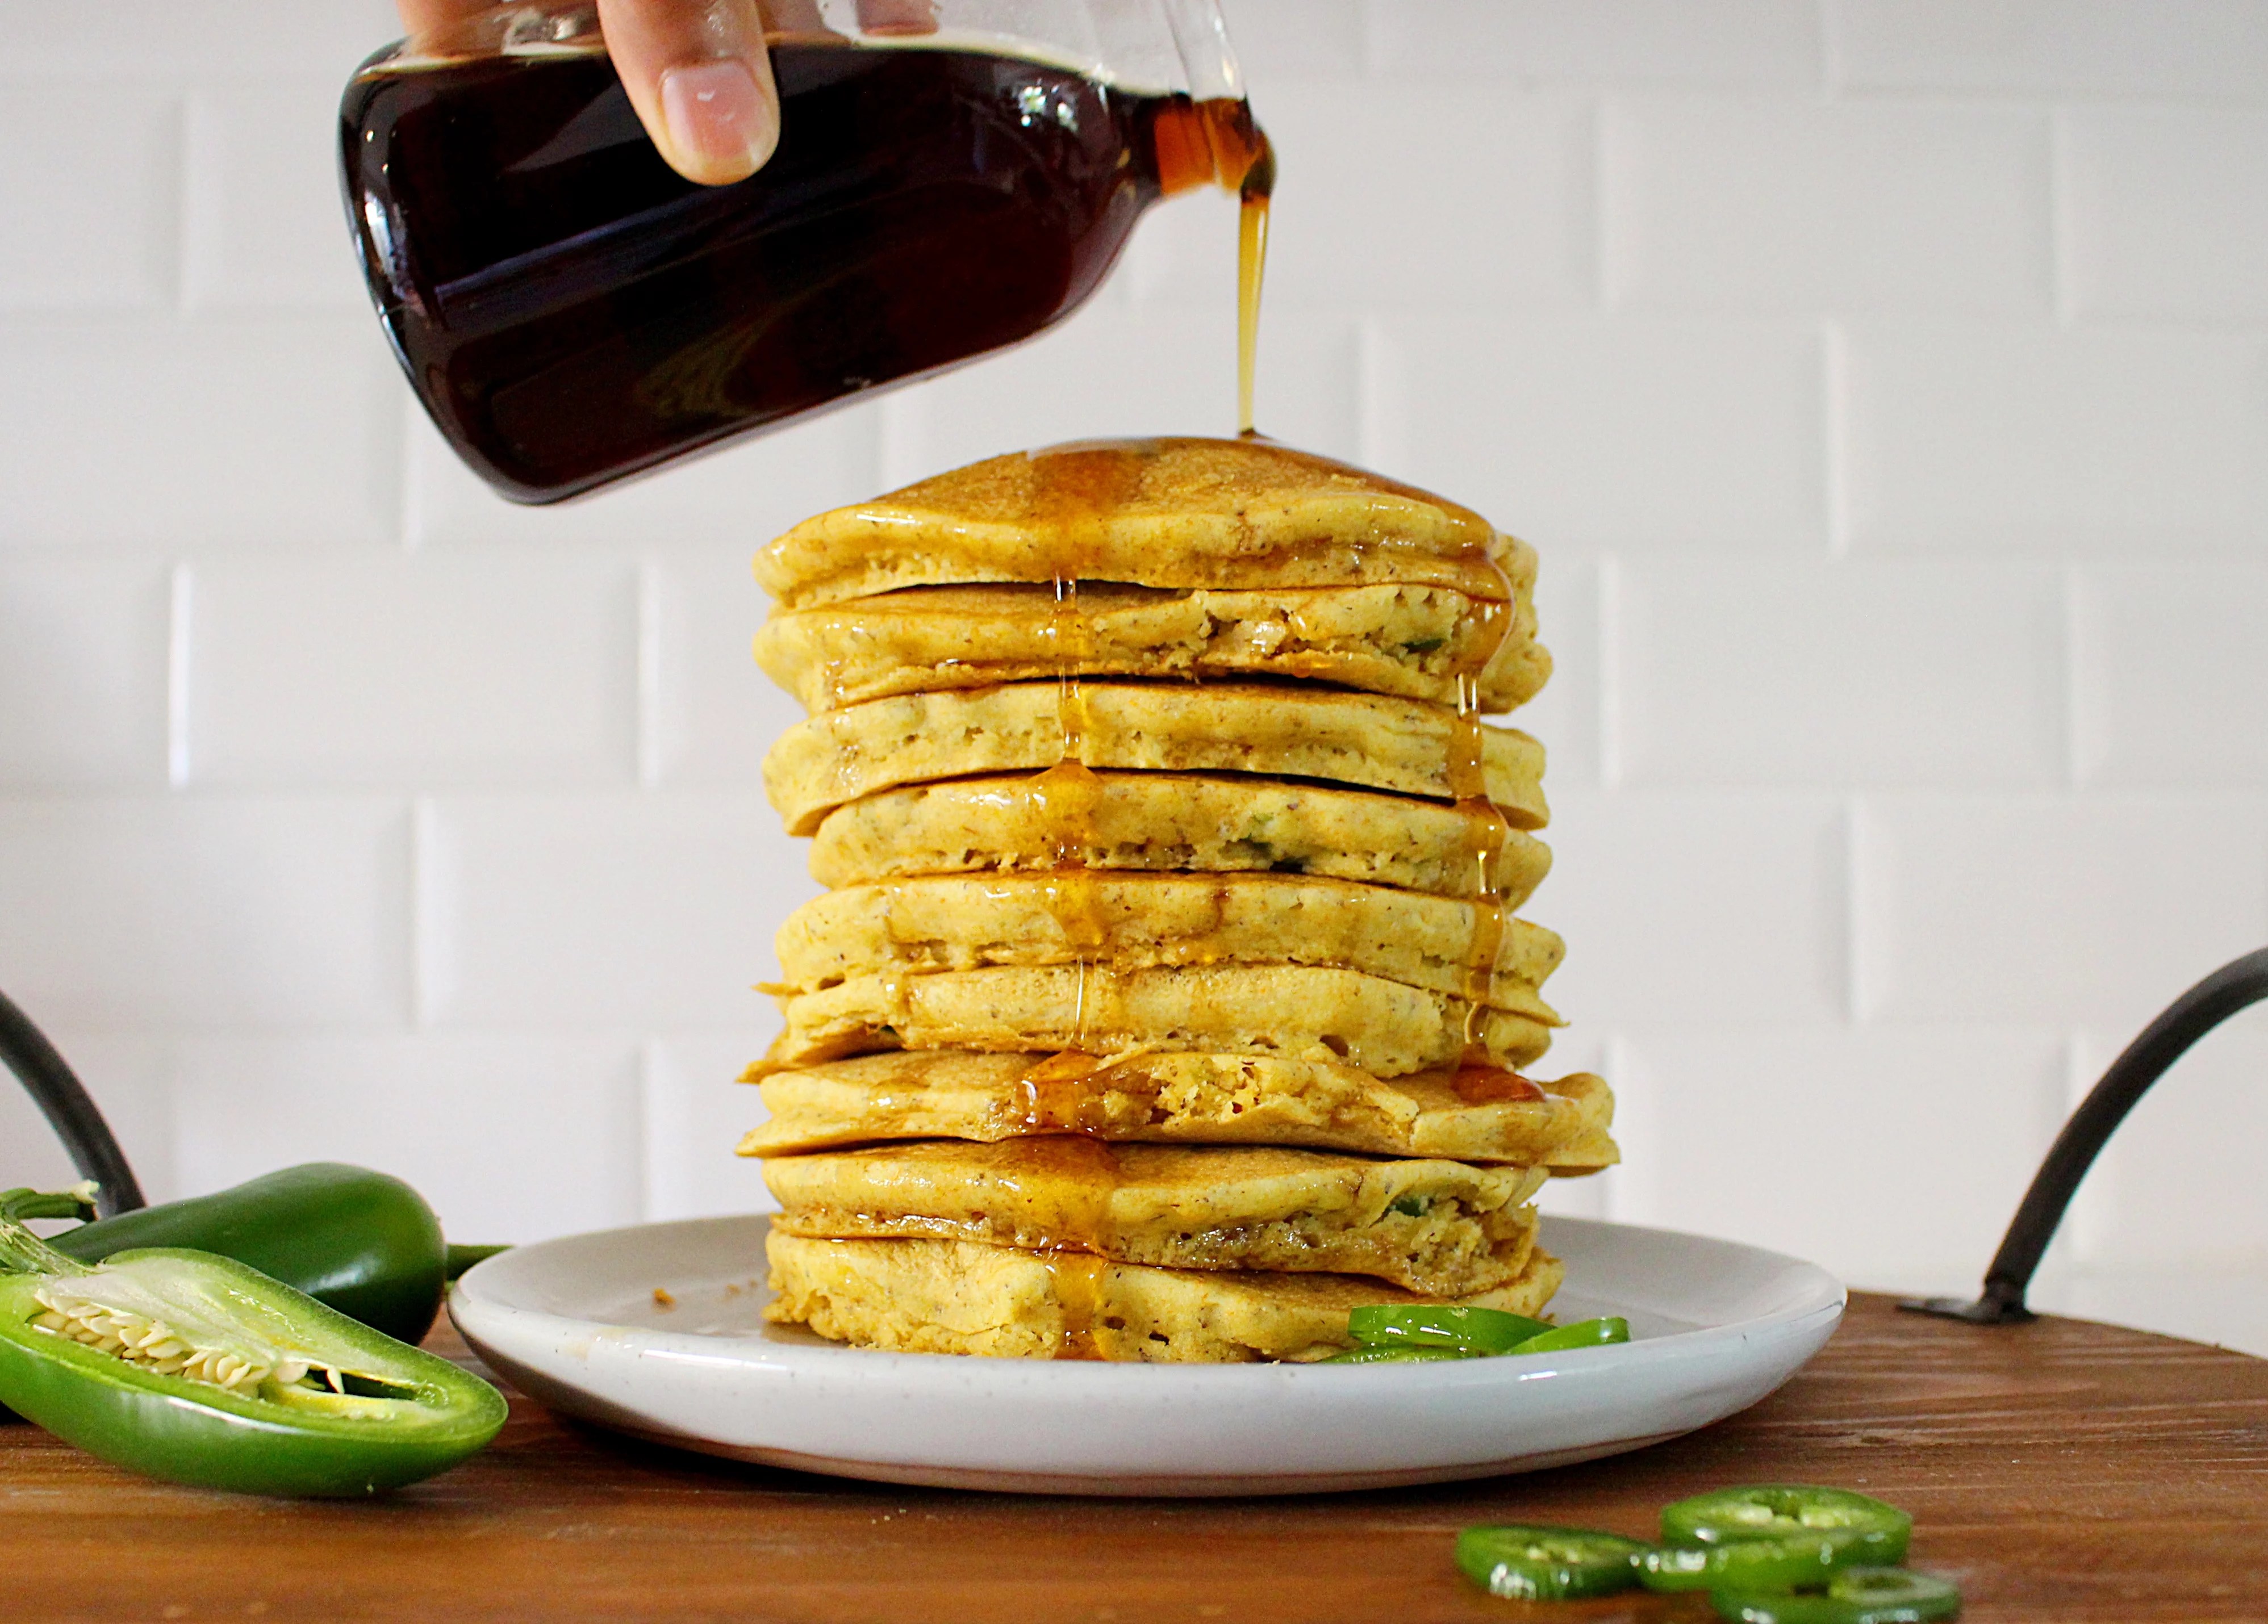 Savory pancake recipes to make at any time of the day Well+Good pic